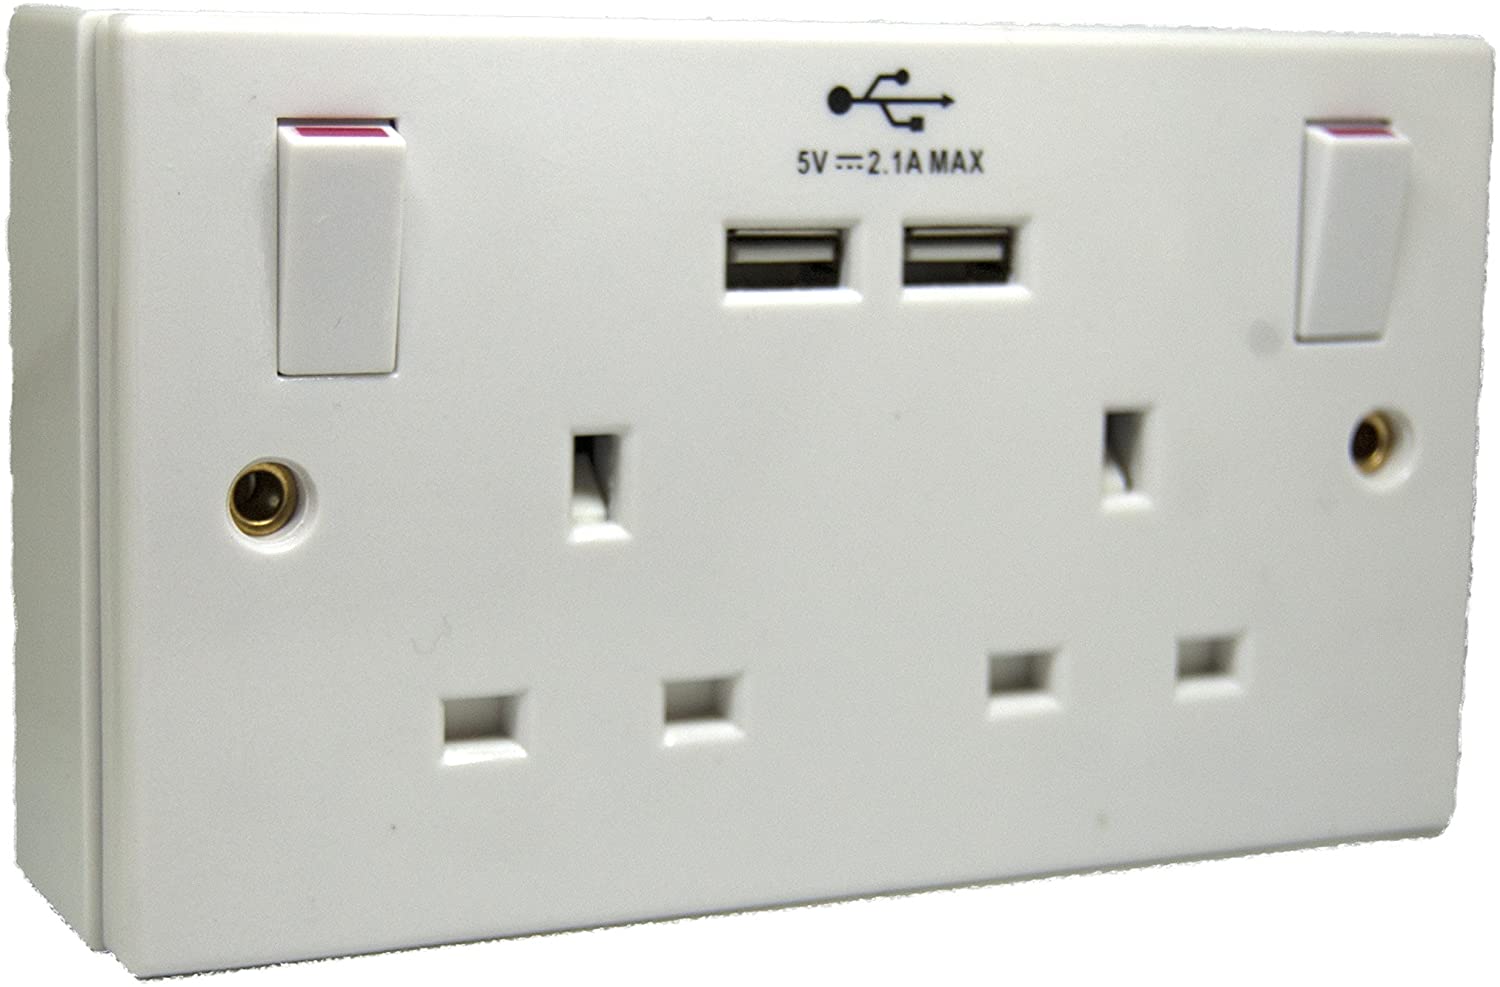 Tools House Double Wall Socket with 2 USB Charger